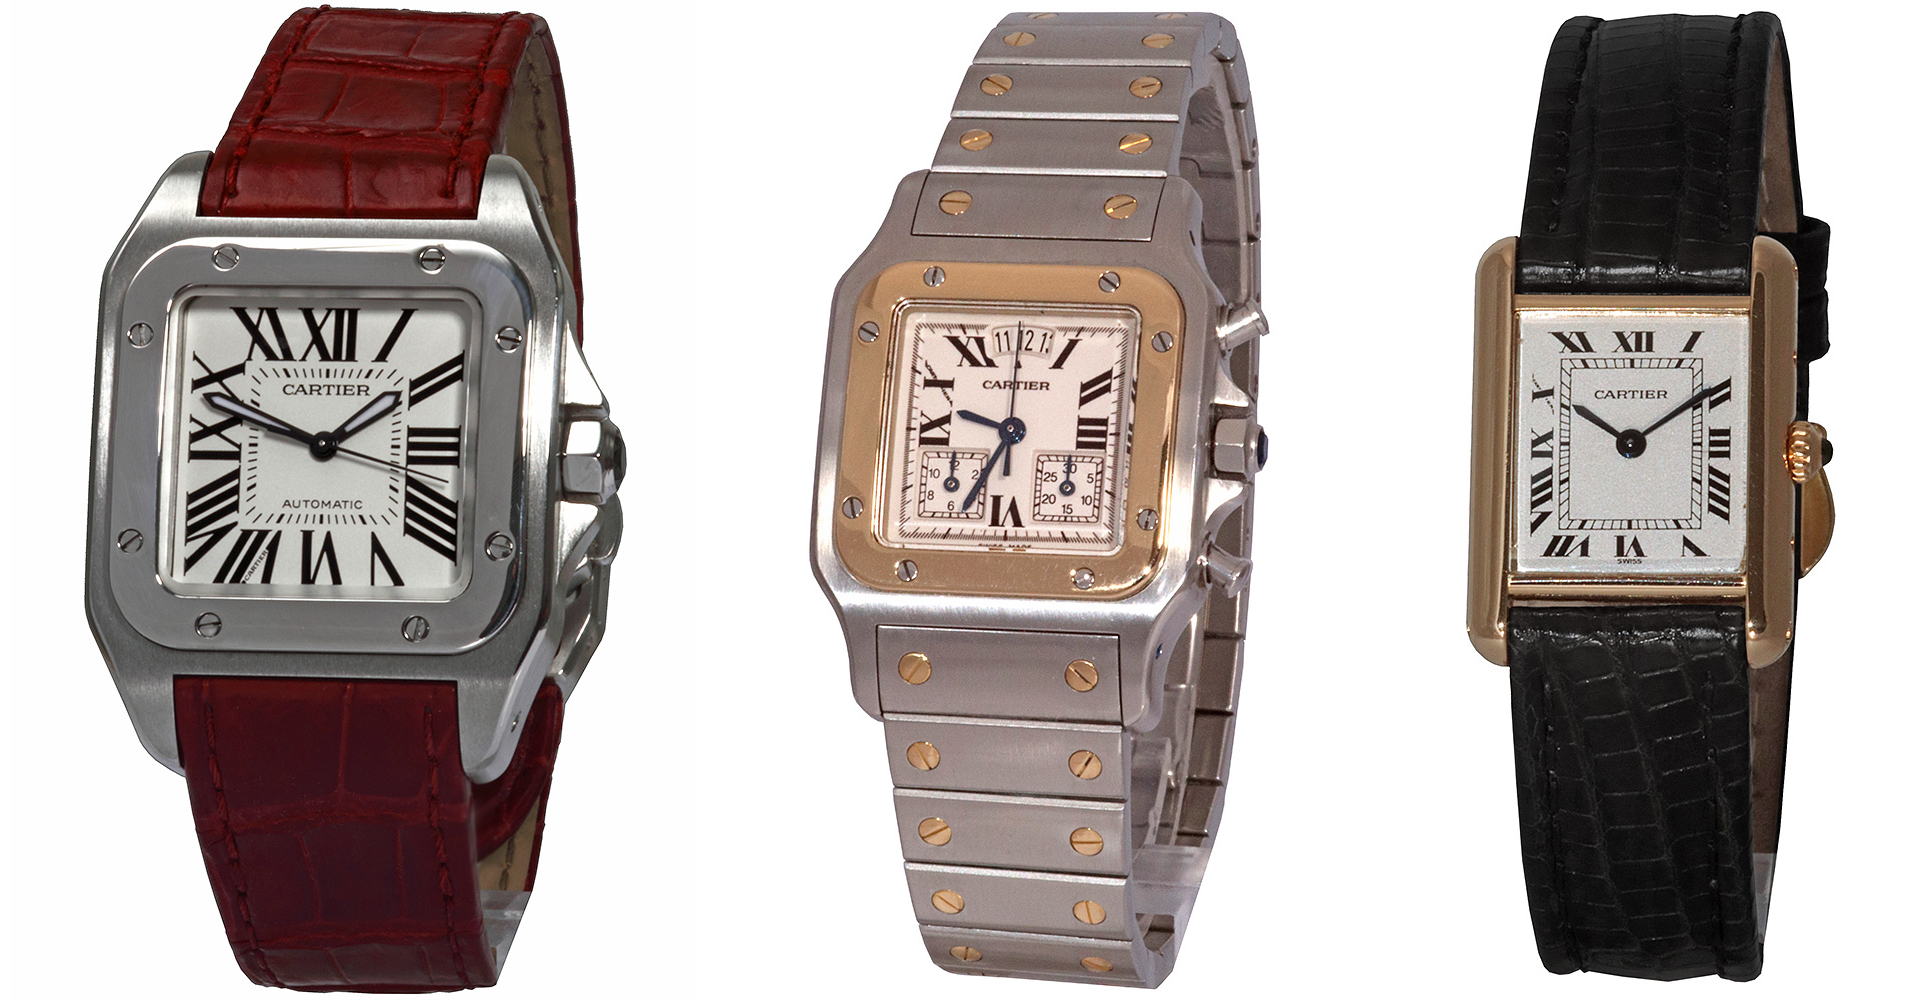 The History of Wrist Watches and Cartier - WatchesLikeNew